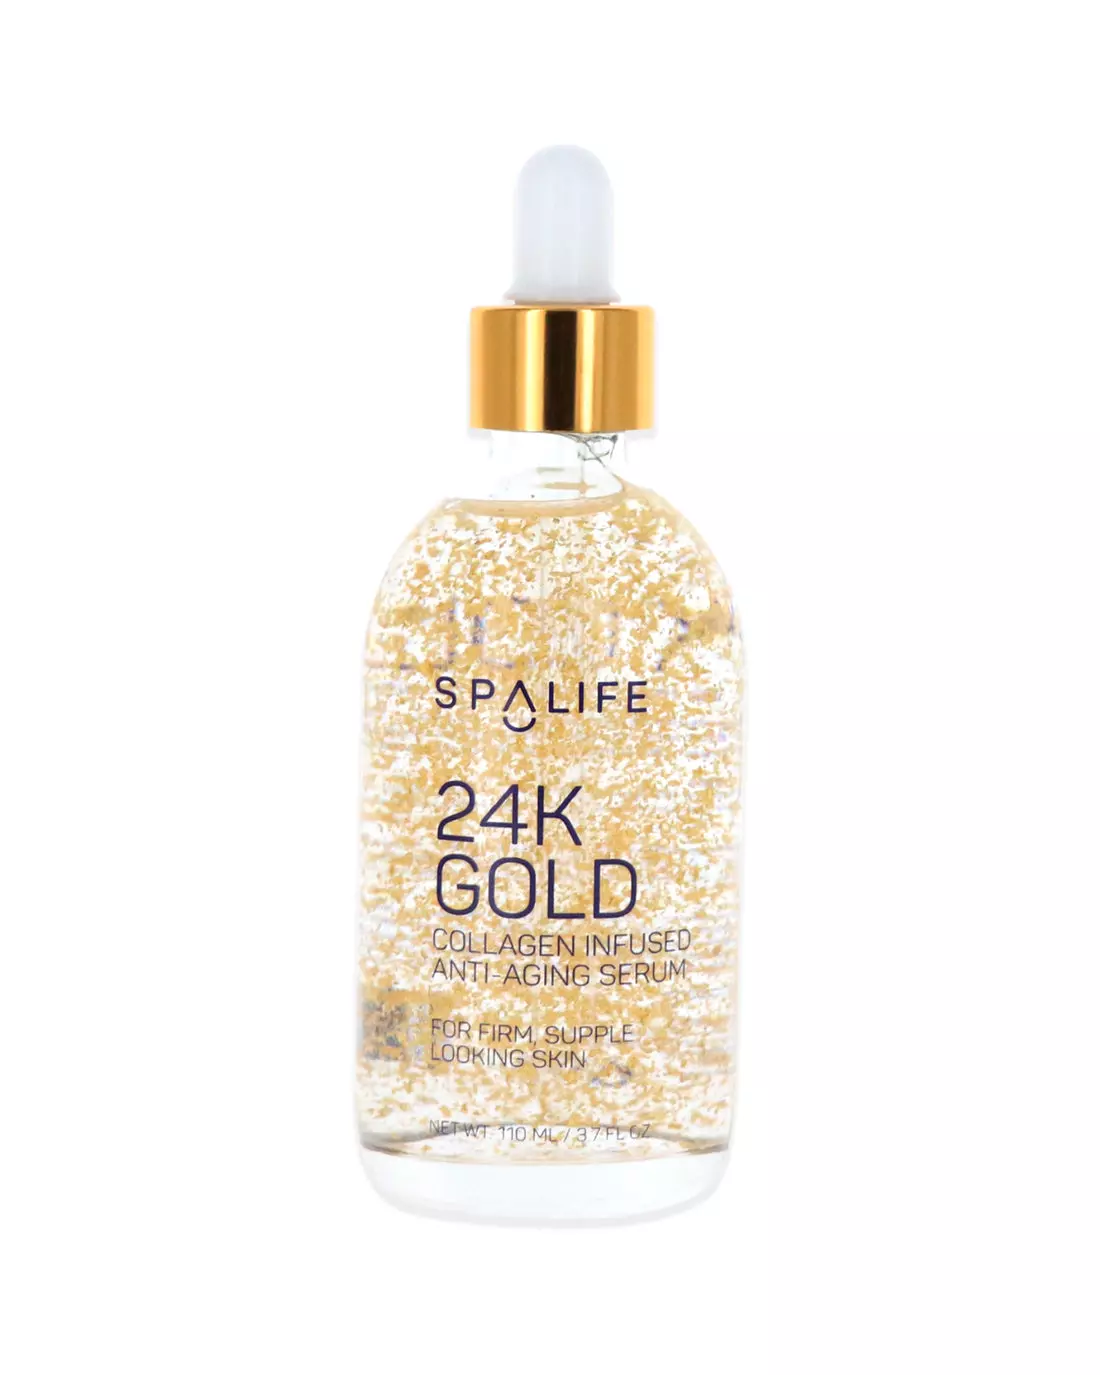 SpaLife 24K Gold Collagen Infused Anti-aging Serum